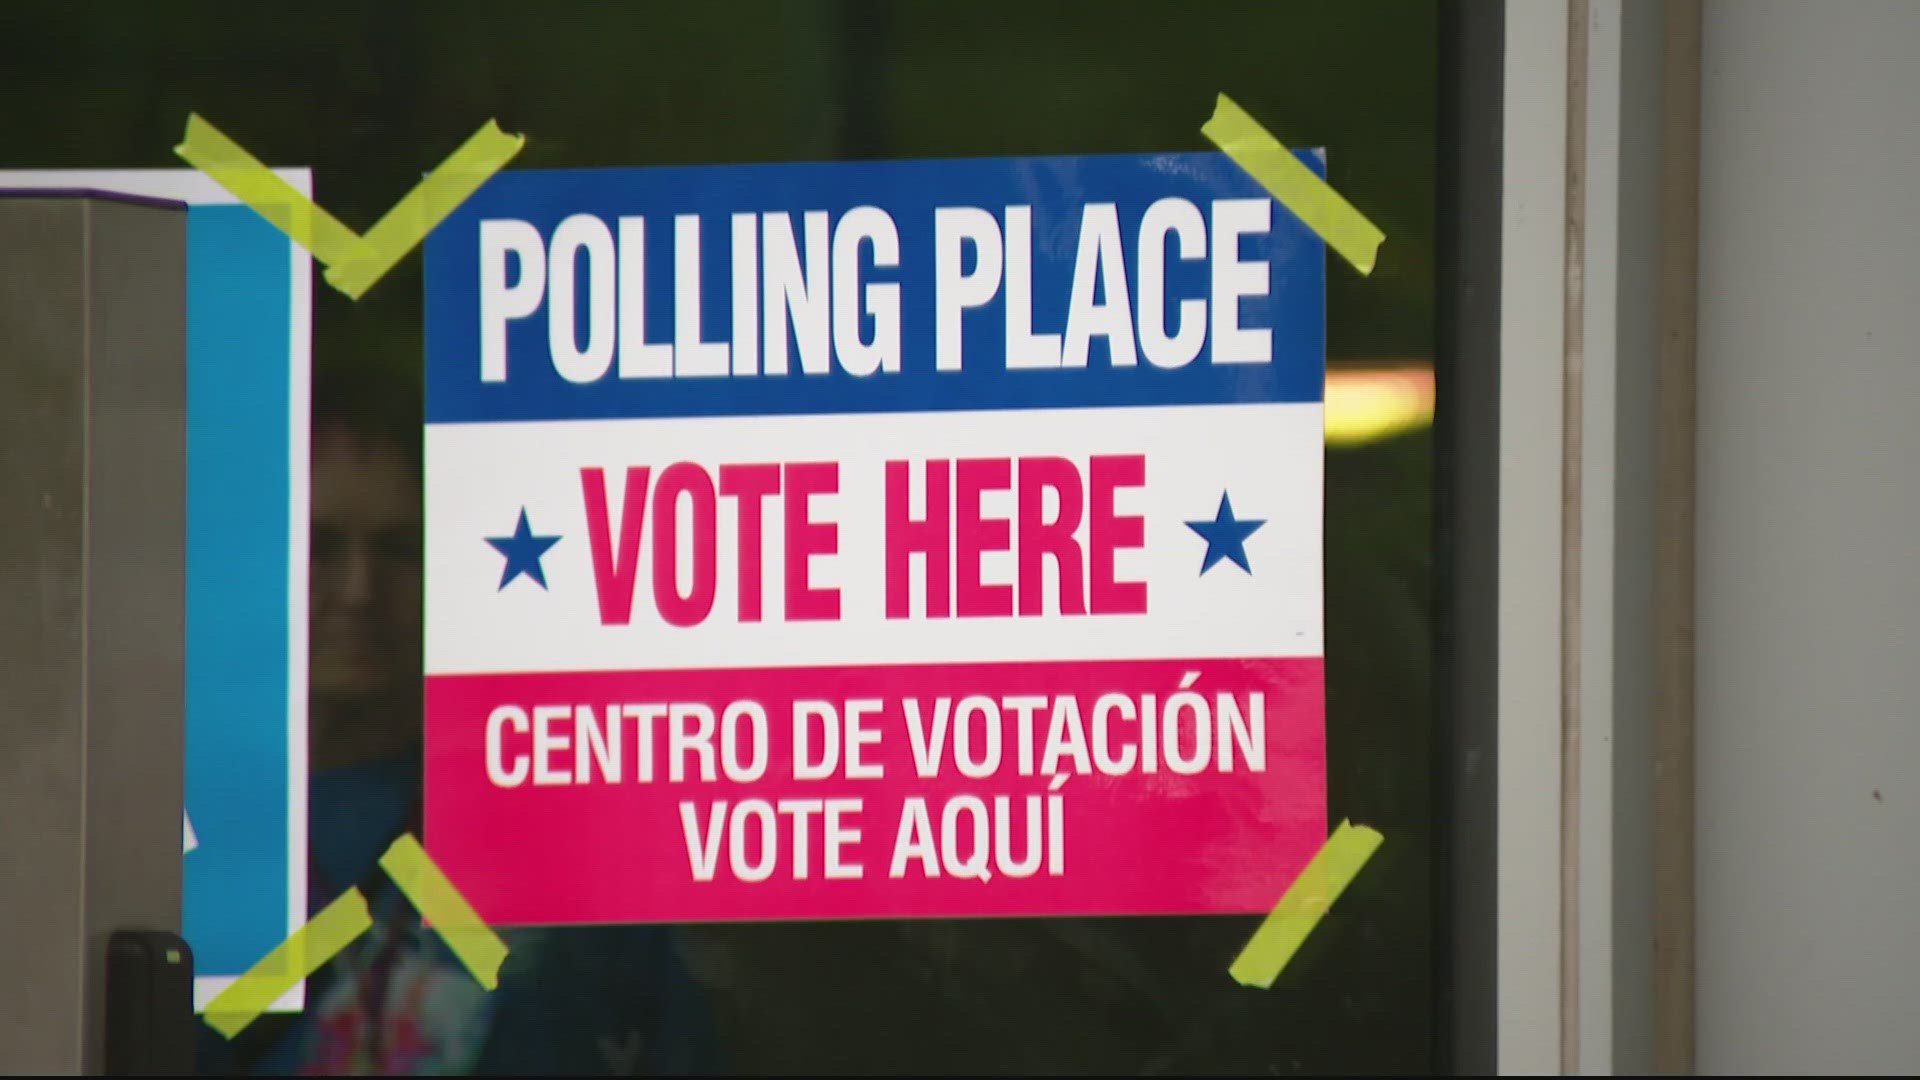 Residents may vote in-person early from Sept. 22 through Nov. 4